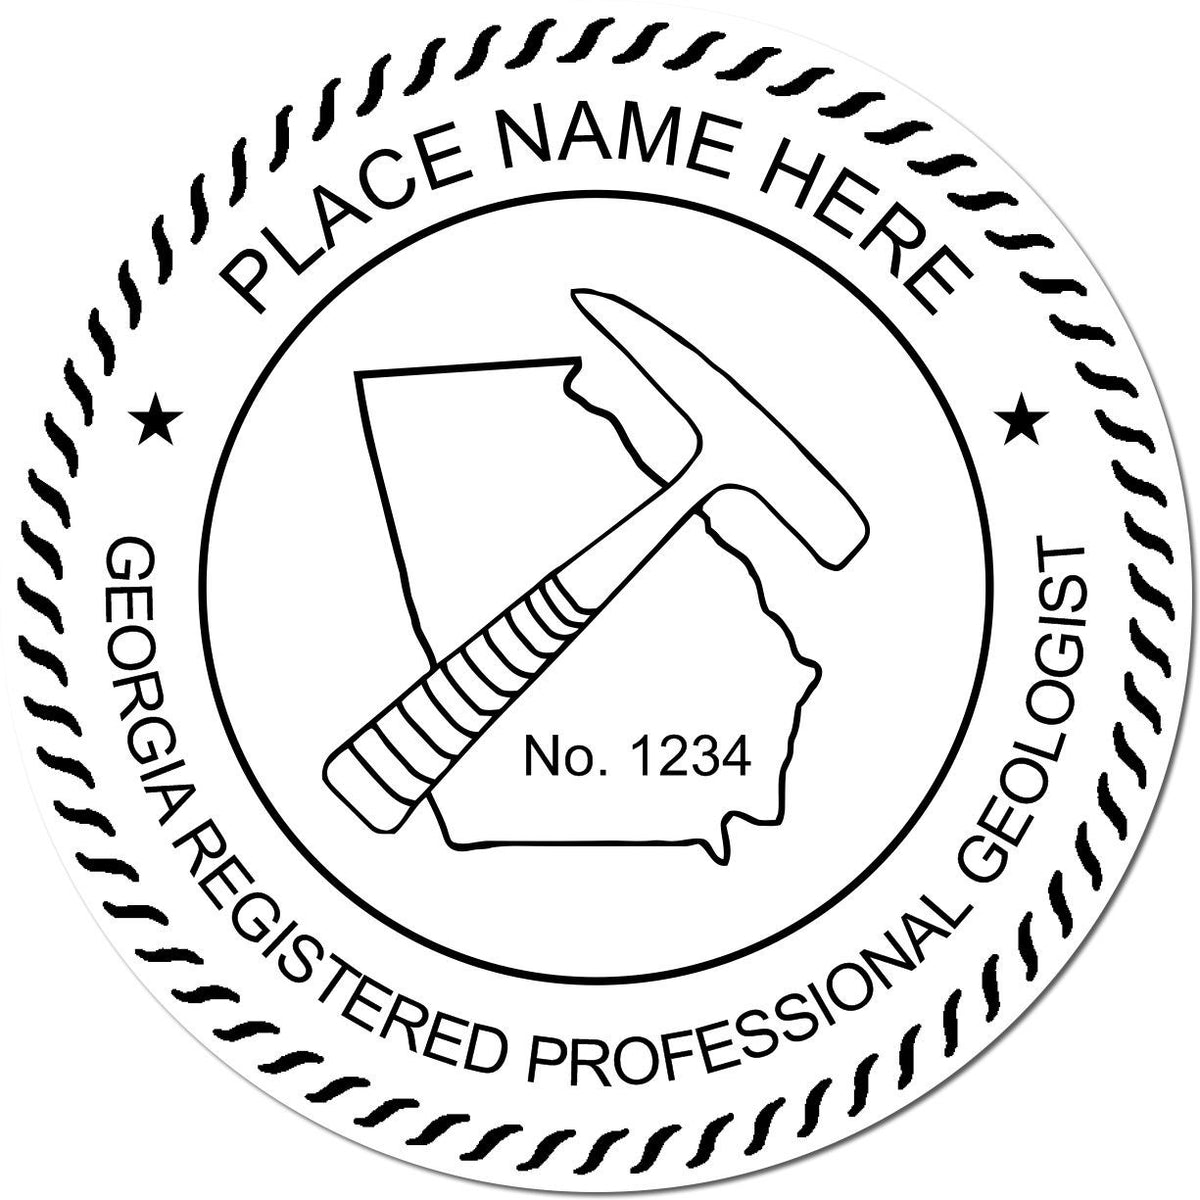 This paper is stamped with a sample imprint of the Georgia Professional Geologist Seal Stamp, signifying its quality and reliability.